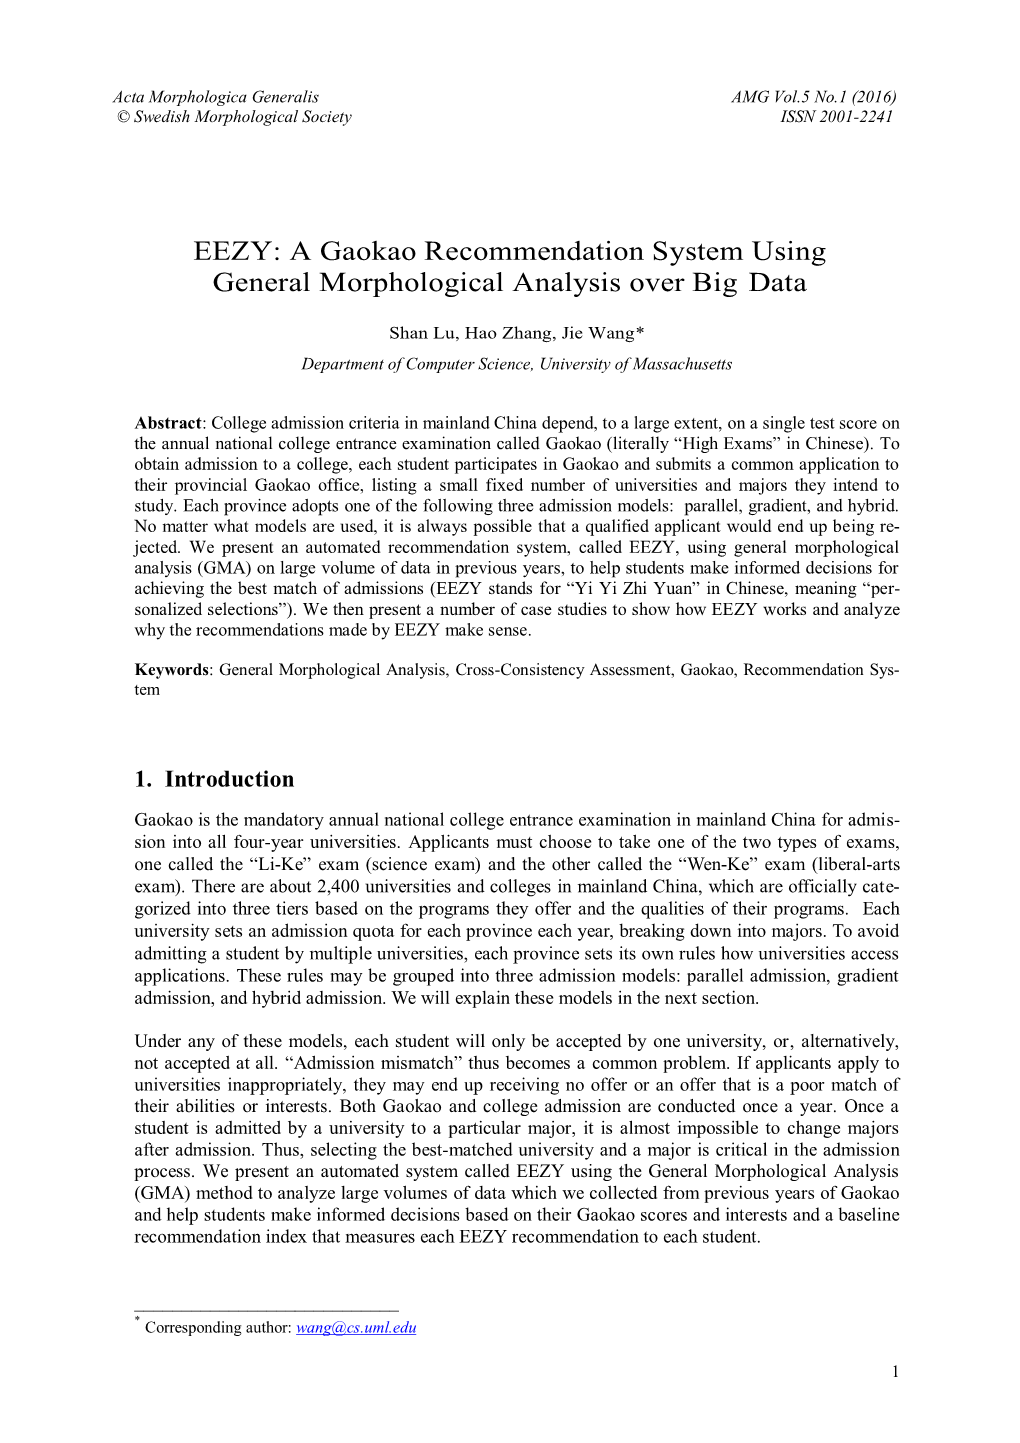 EEZY: a Gaokao Recommendation System Using General Morphological Analysis Over Big Data